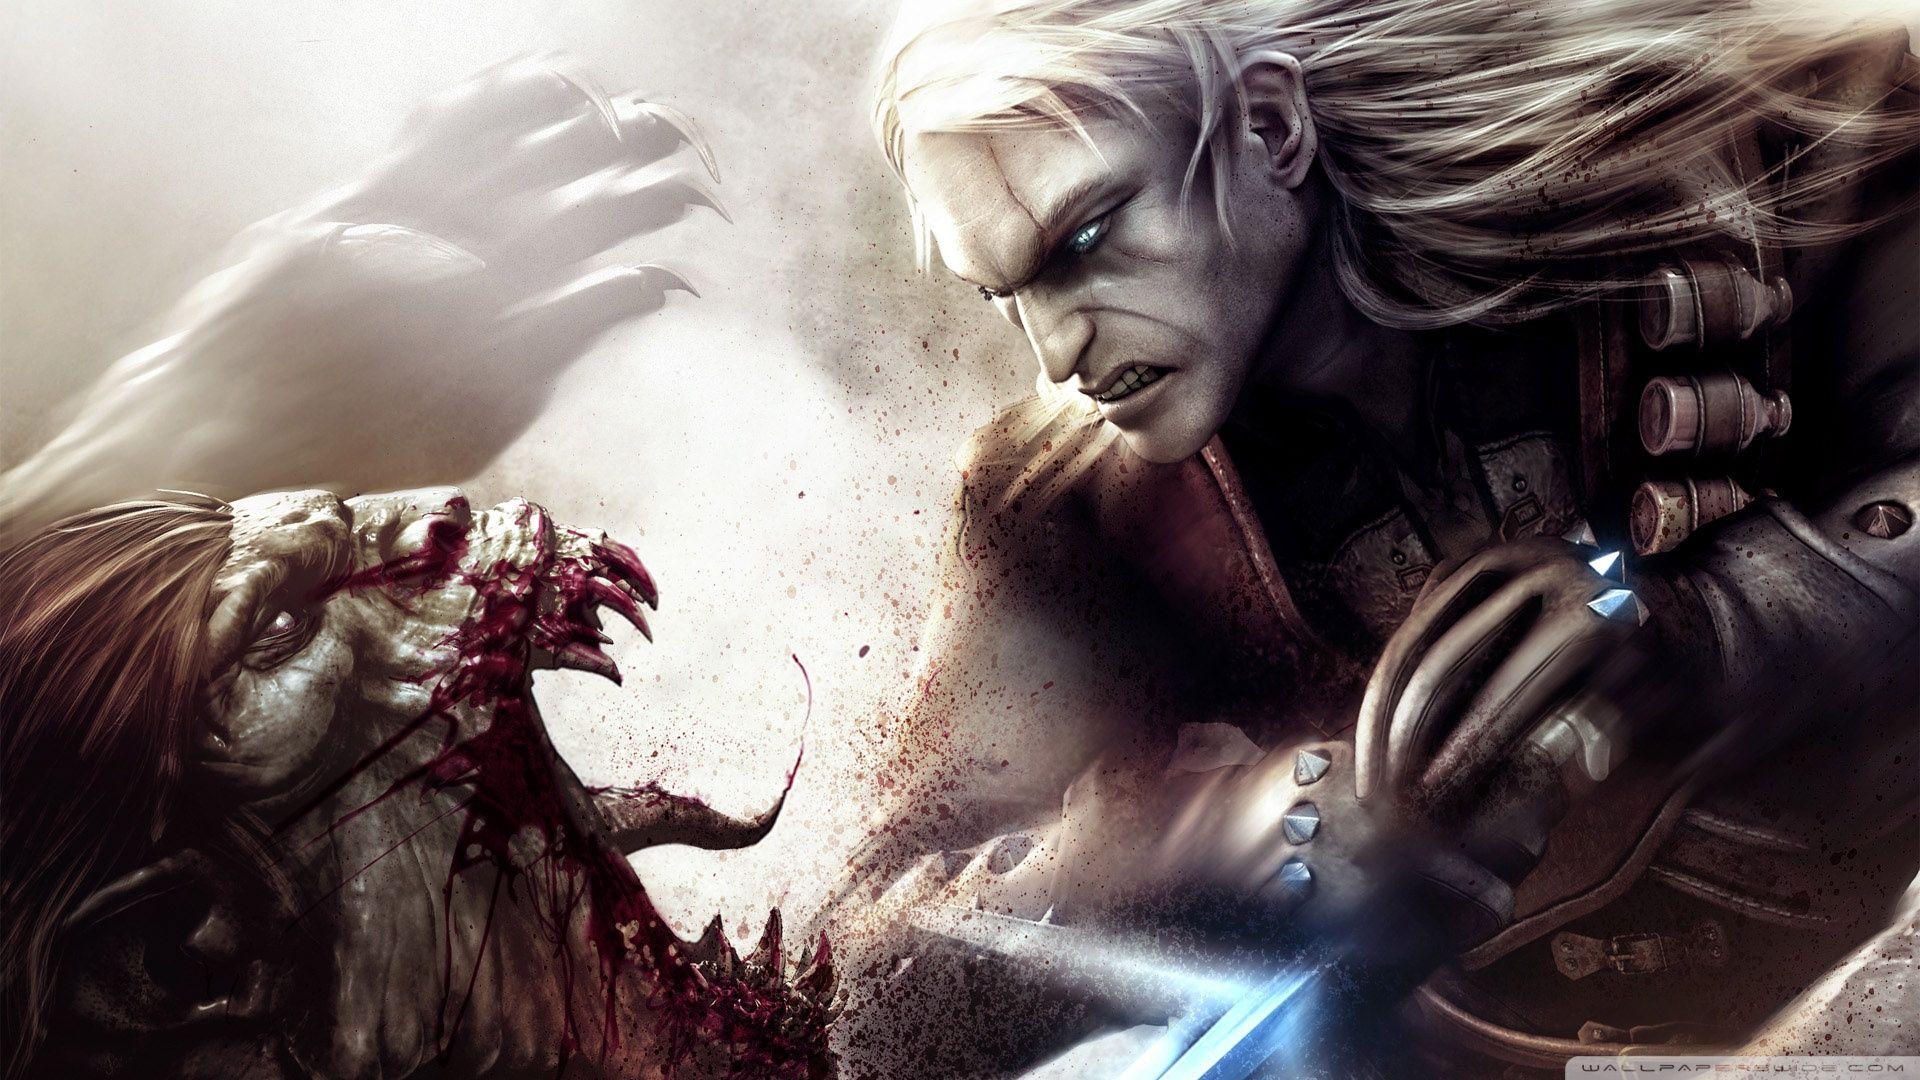 The Witcher 1 Wallpaper Free The Witcher 1 Background